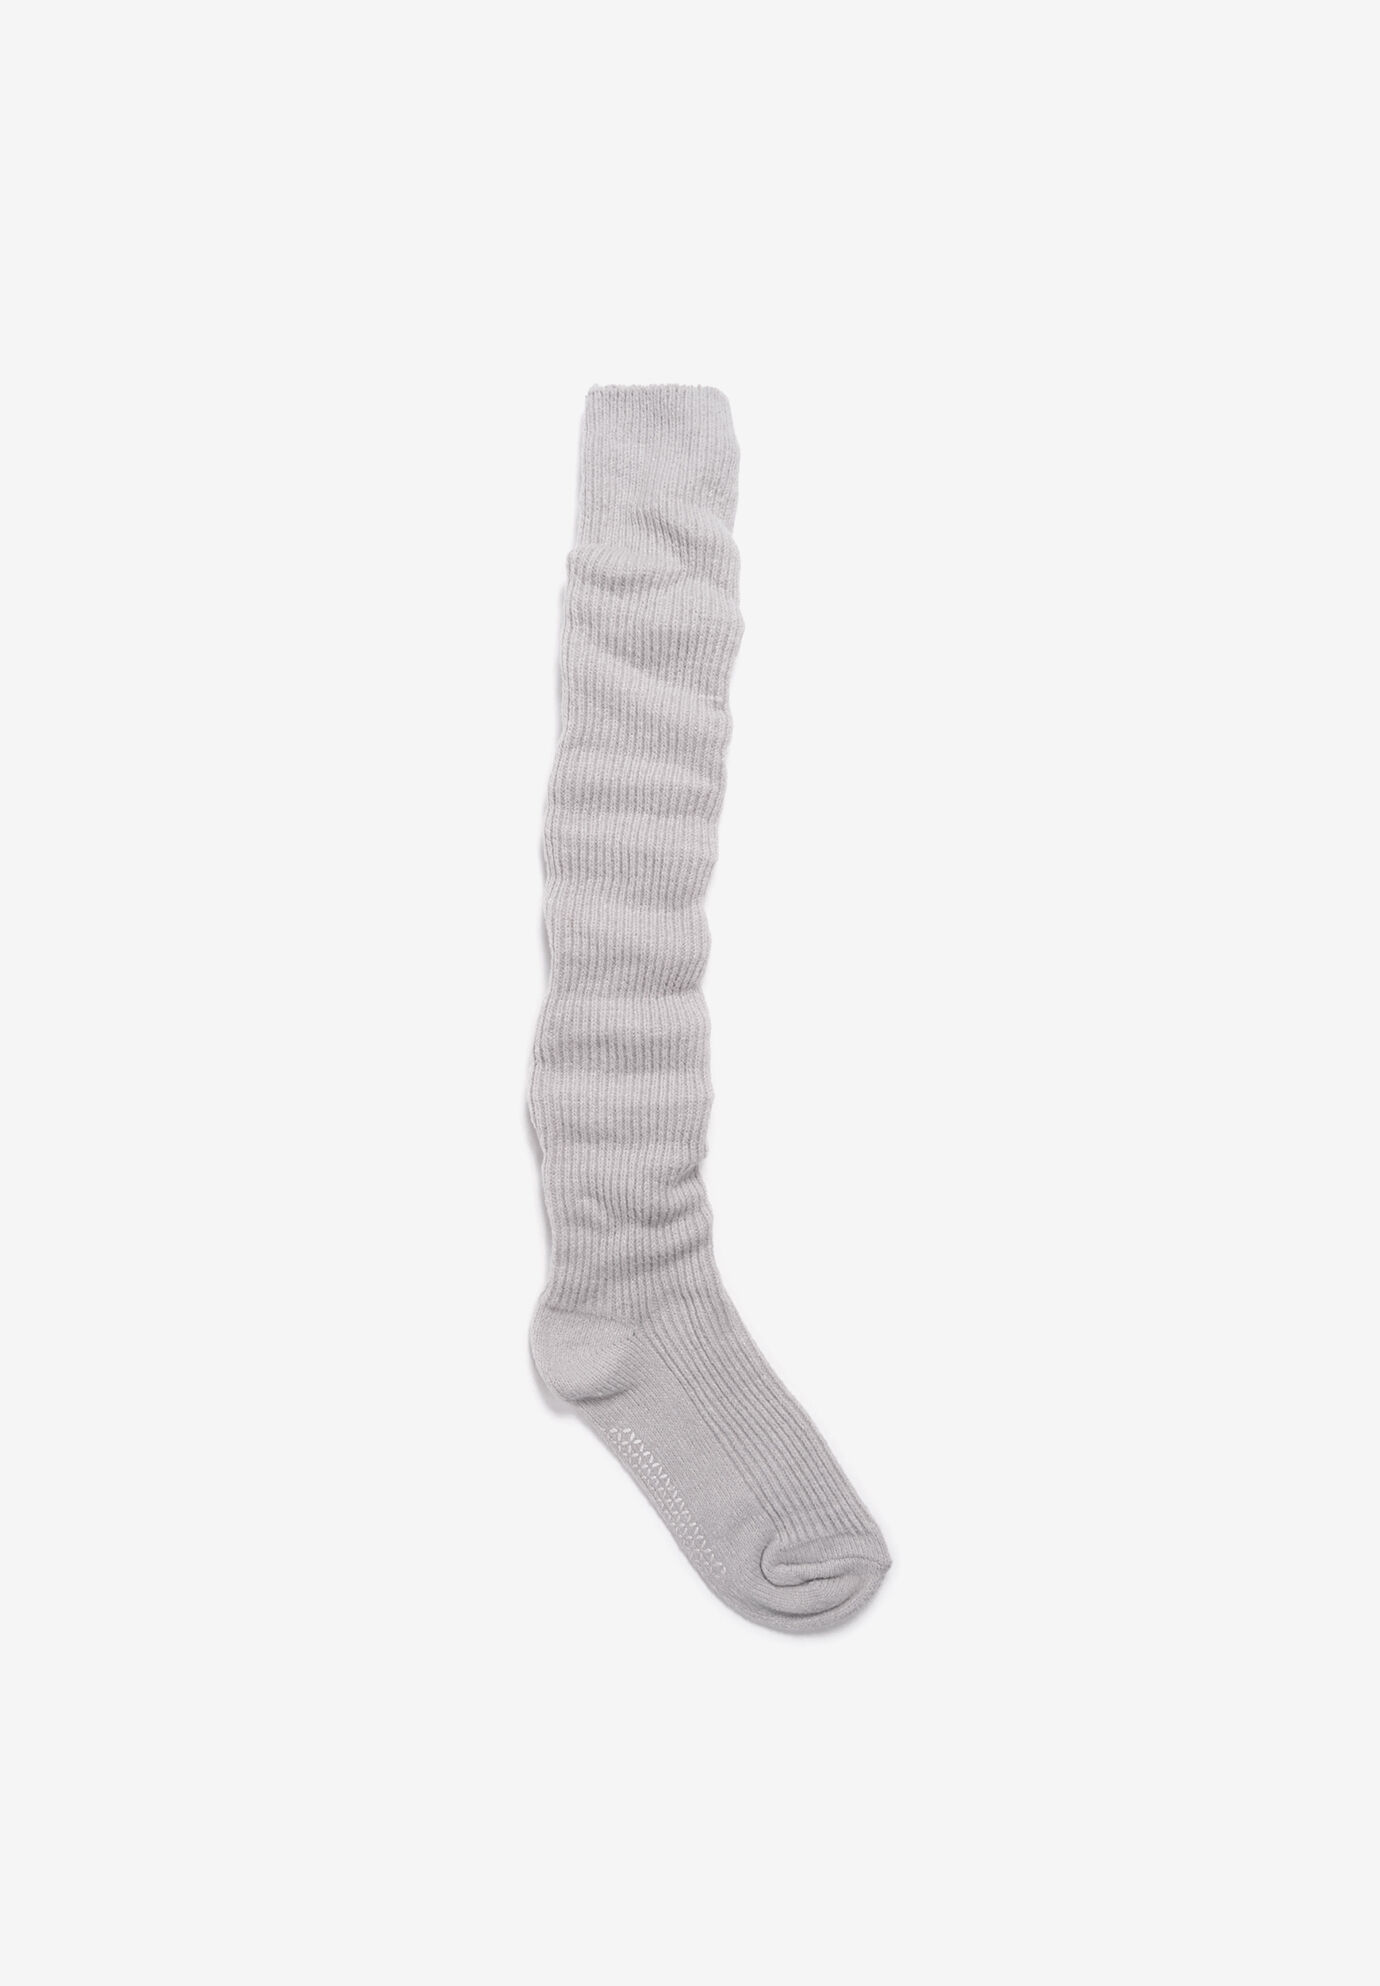 Women's Over The Knee Slouchy Socks by Kathy Ireland in Medium Grey Heather (Size ONE)